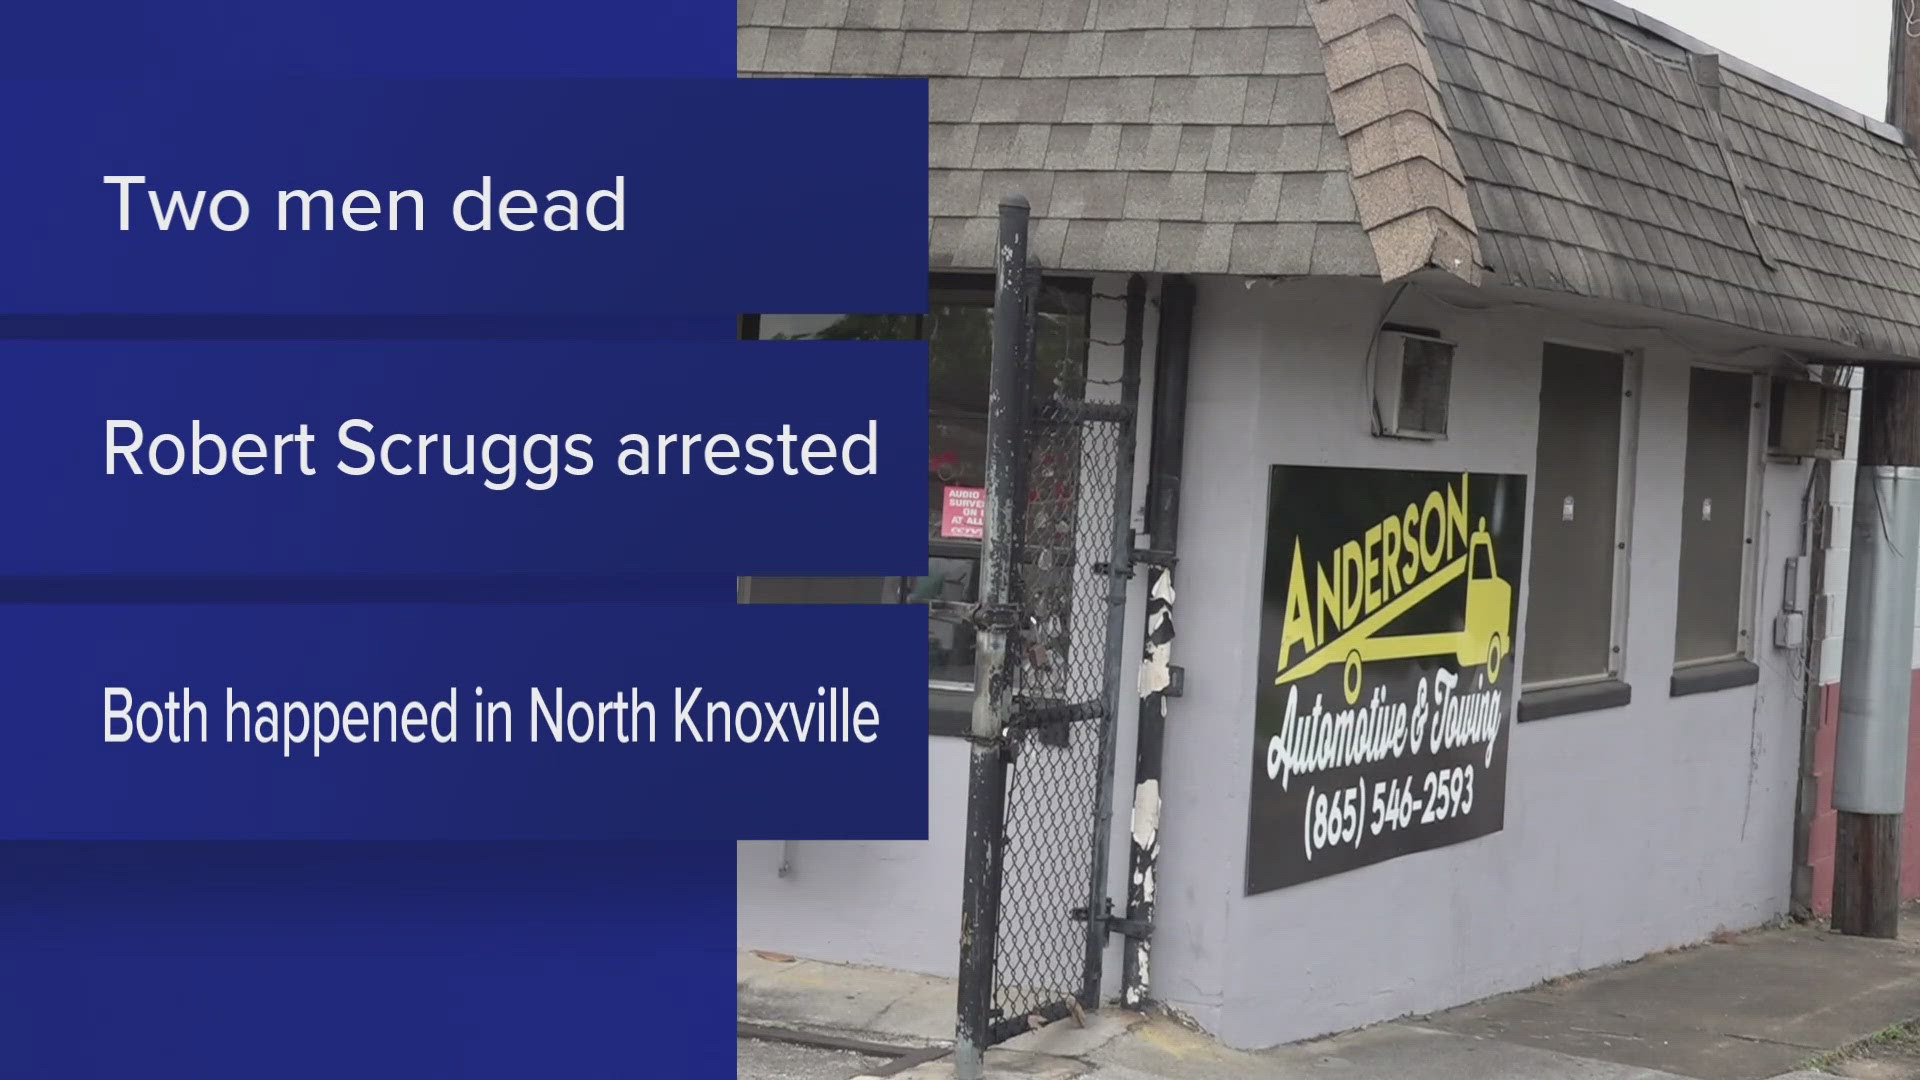 Knoxville Police said the first shooting happened at Anderson Automotive and Towing on Cooper Street and the second happened in the 400 block on North Broadway.